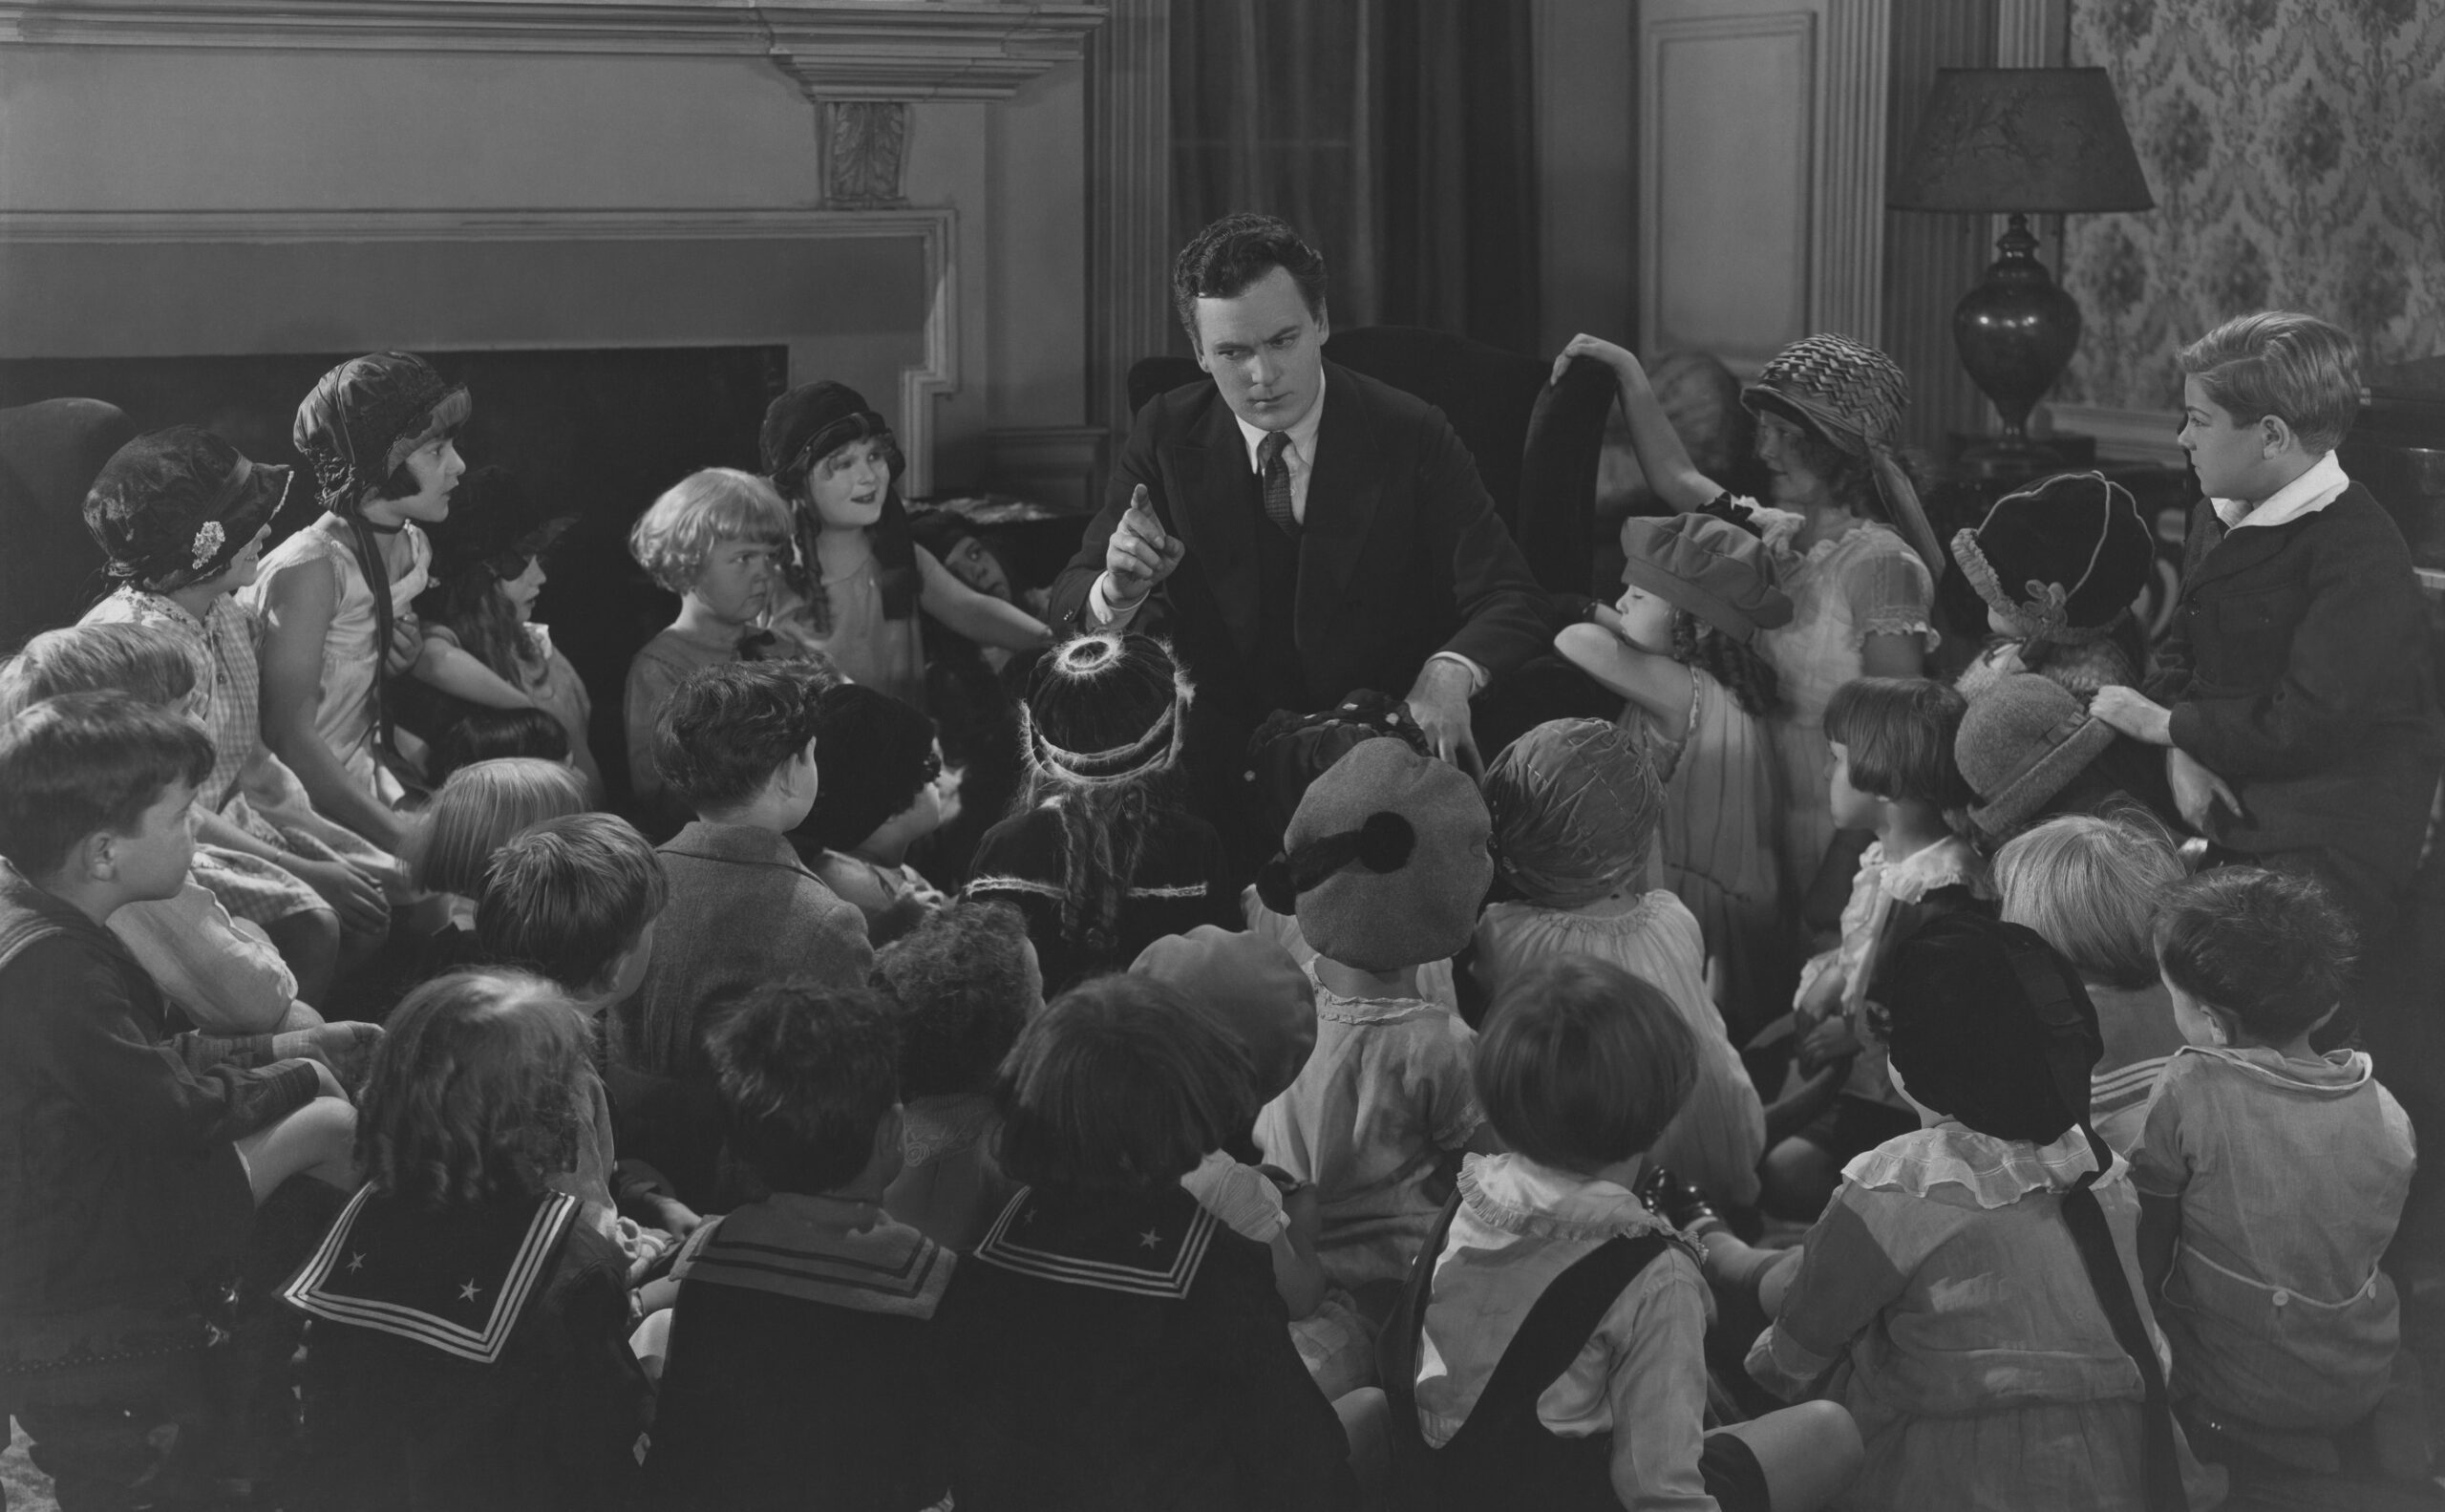 vintage photo of adult telling a story to a group of children sitting on the floor in a semi-circle around him